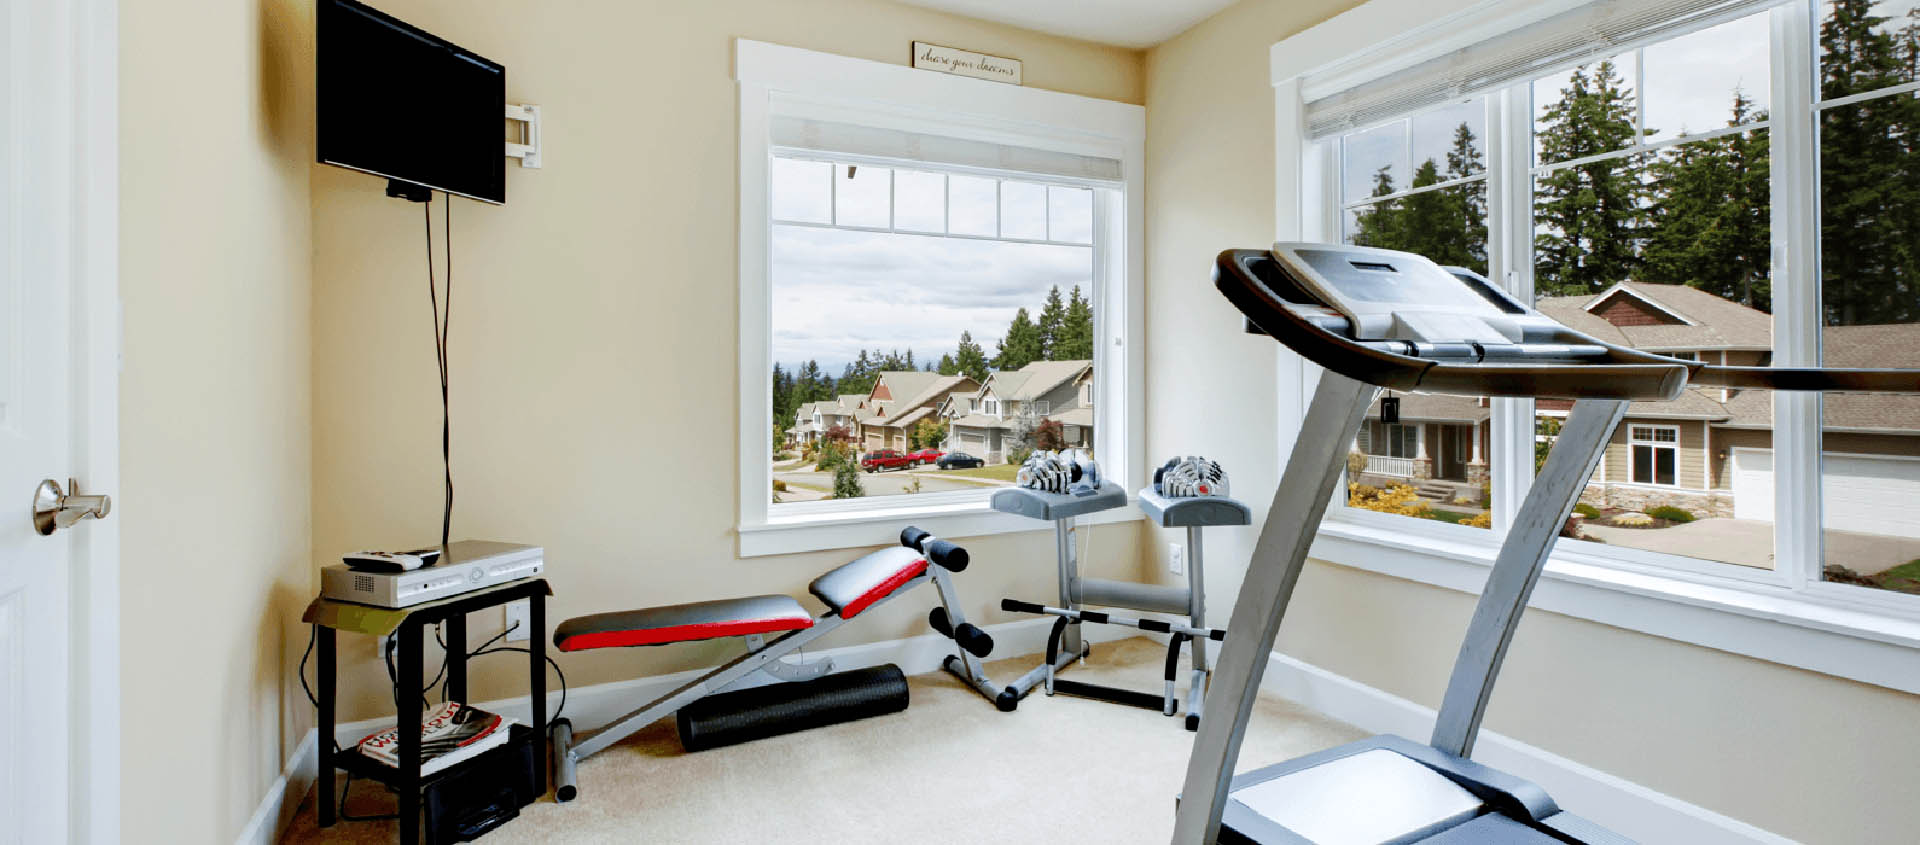 Home Gym Ideas You Can’t Live Without Featured Image